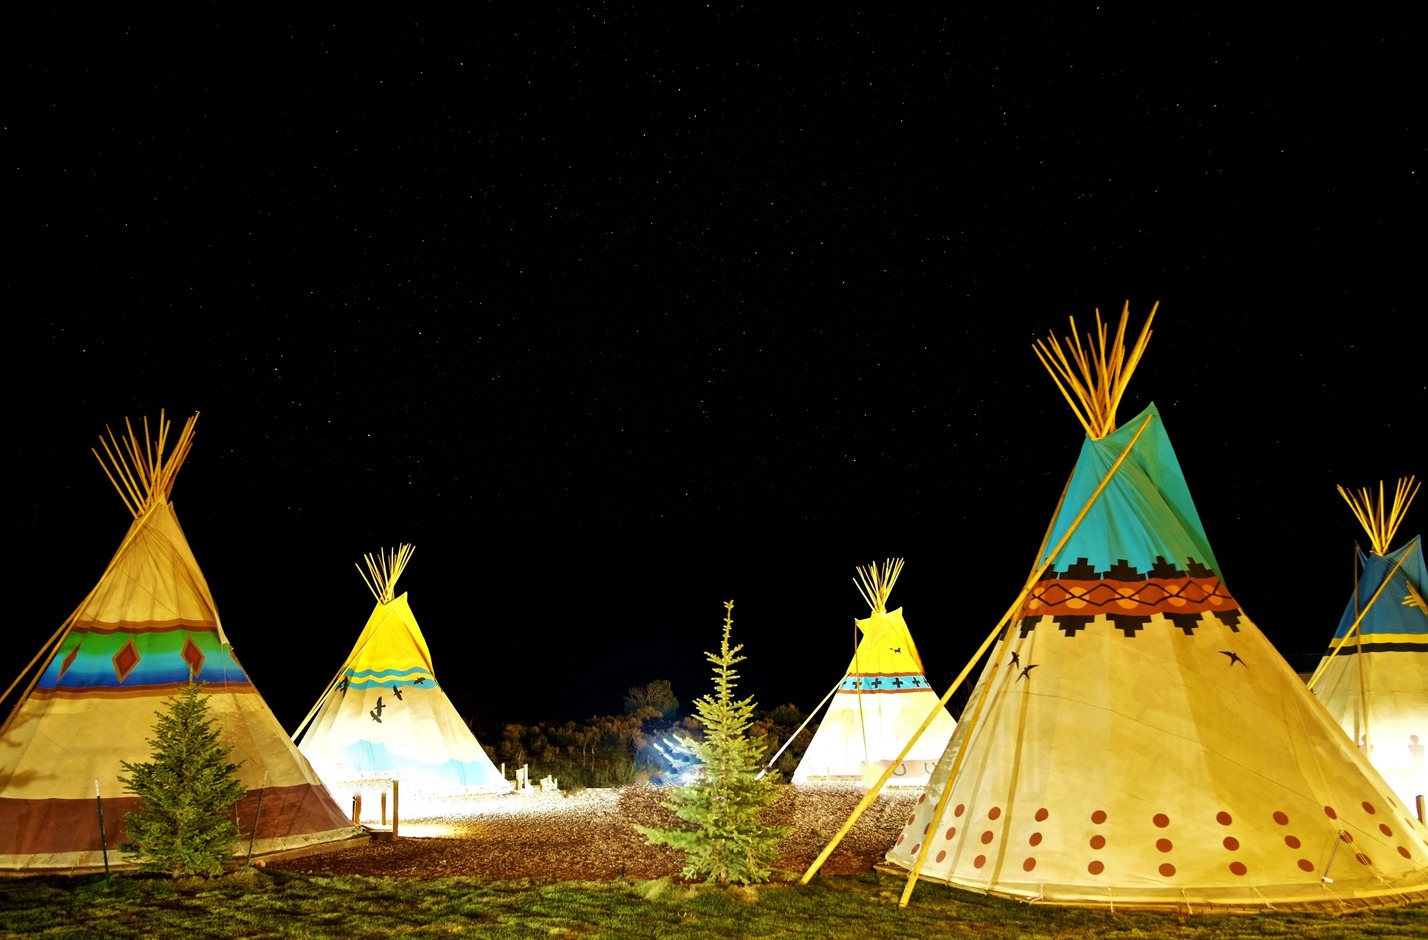 Large Teepee Tents Under Starry Sky